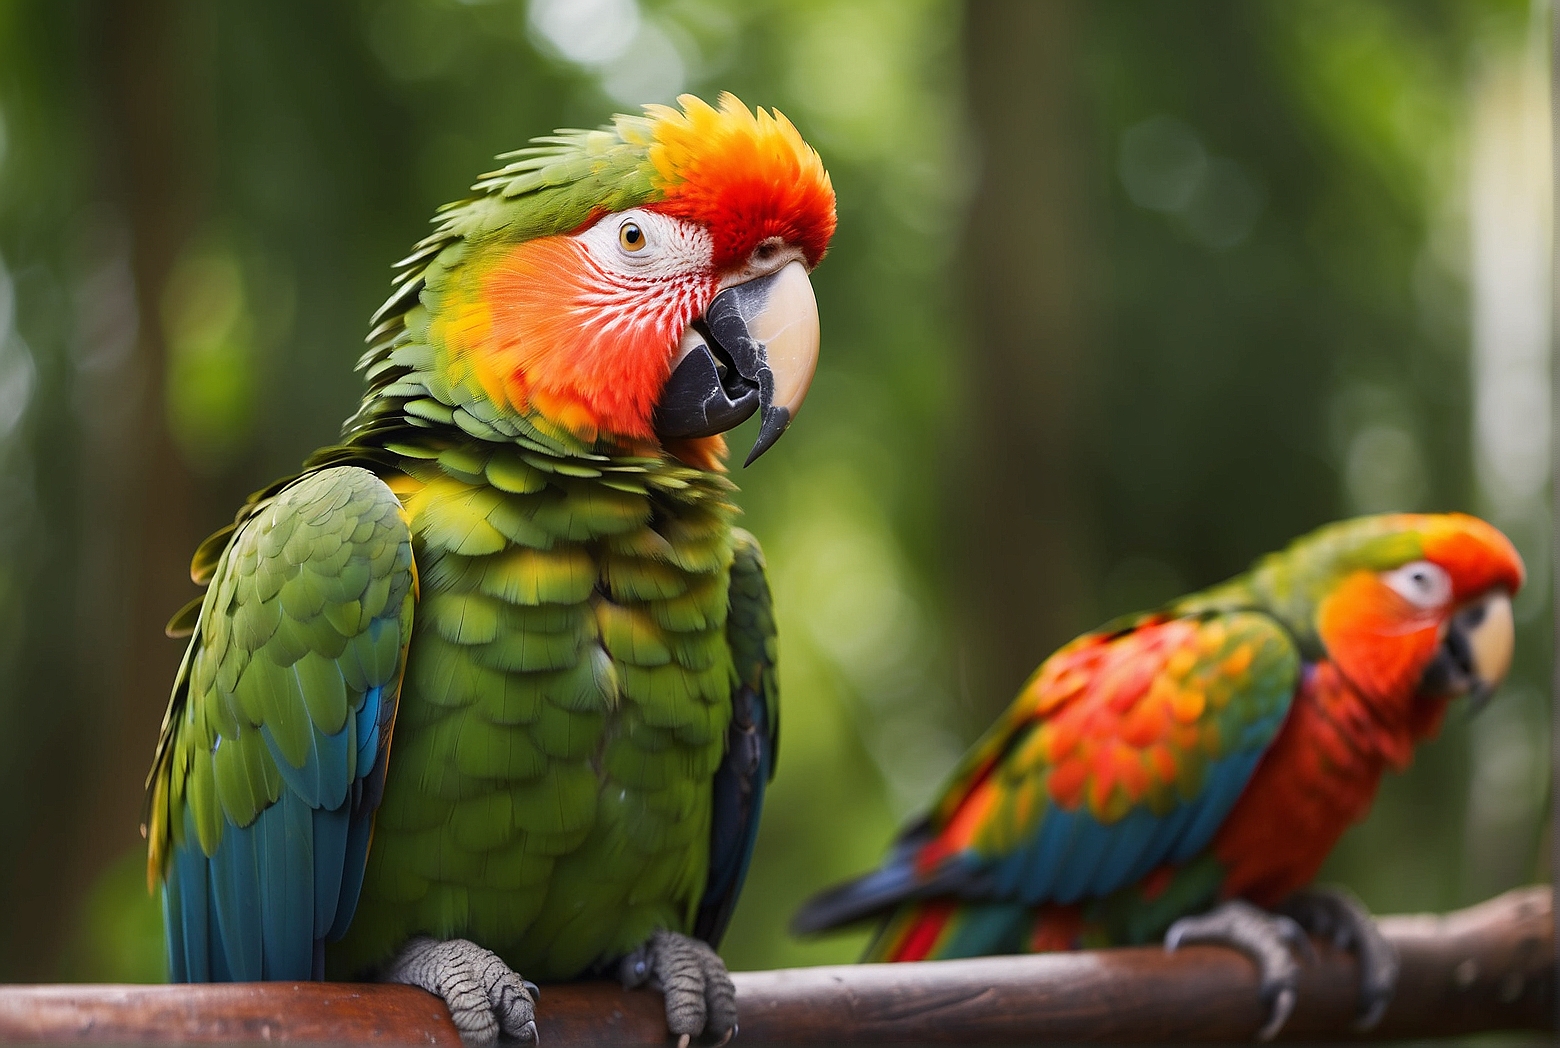 Effective methods to stop a parrot from screaming